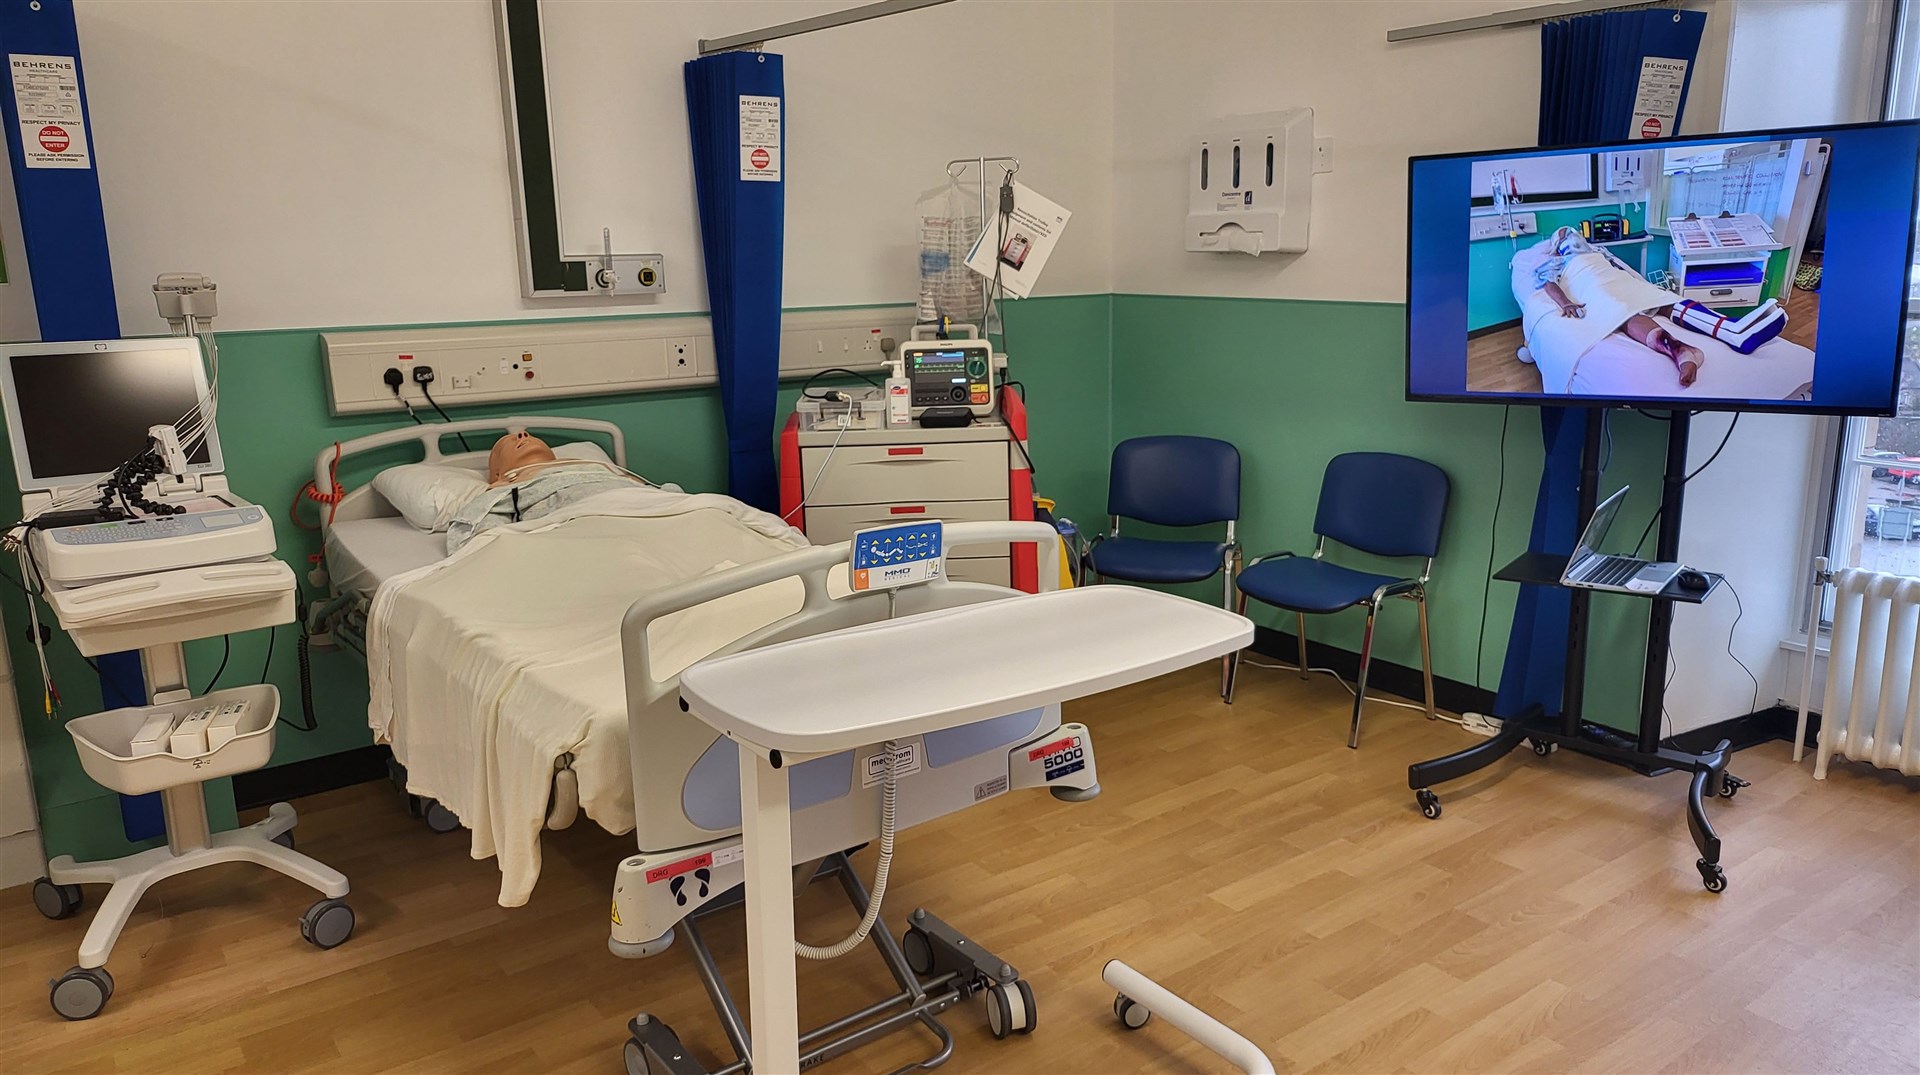 The centre features virtual wards, simulation mannequins and livestreaming technology.